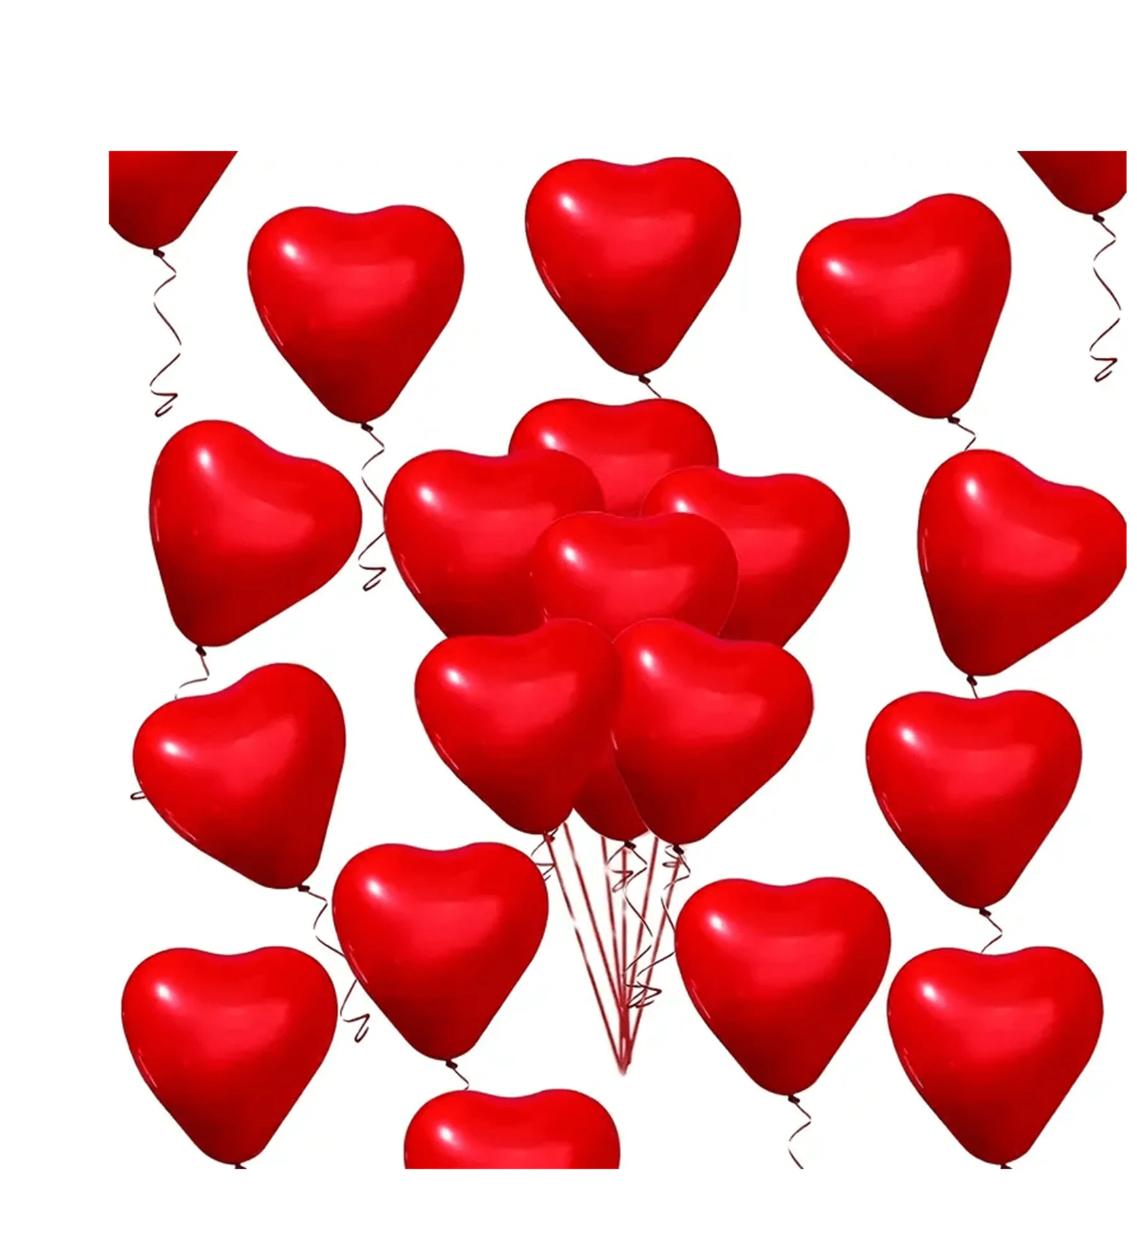 Hearts in Harmony: 20pcs Love Heart Shaped Red Latex Balloons – 10 Inches of Romance for Every Occasion!